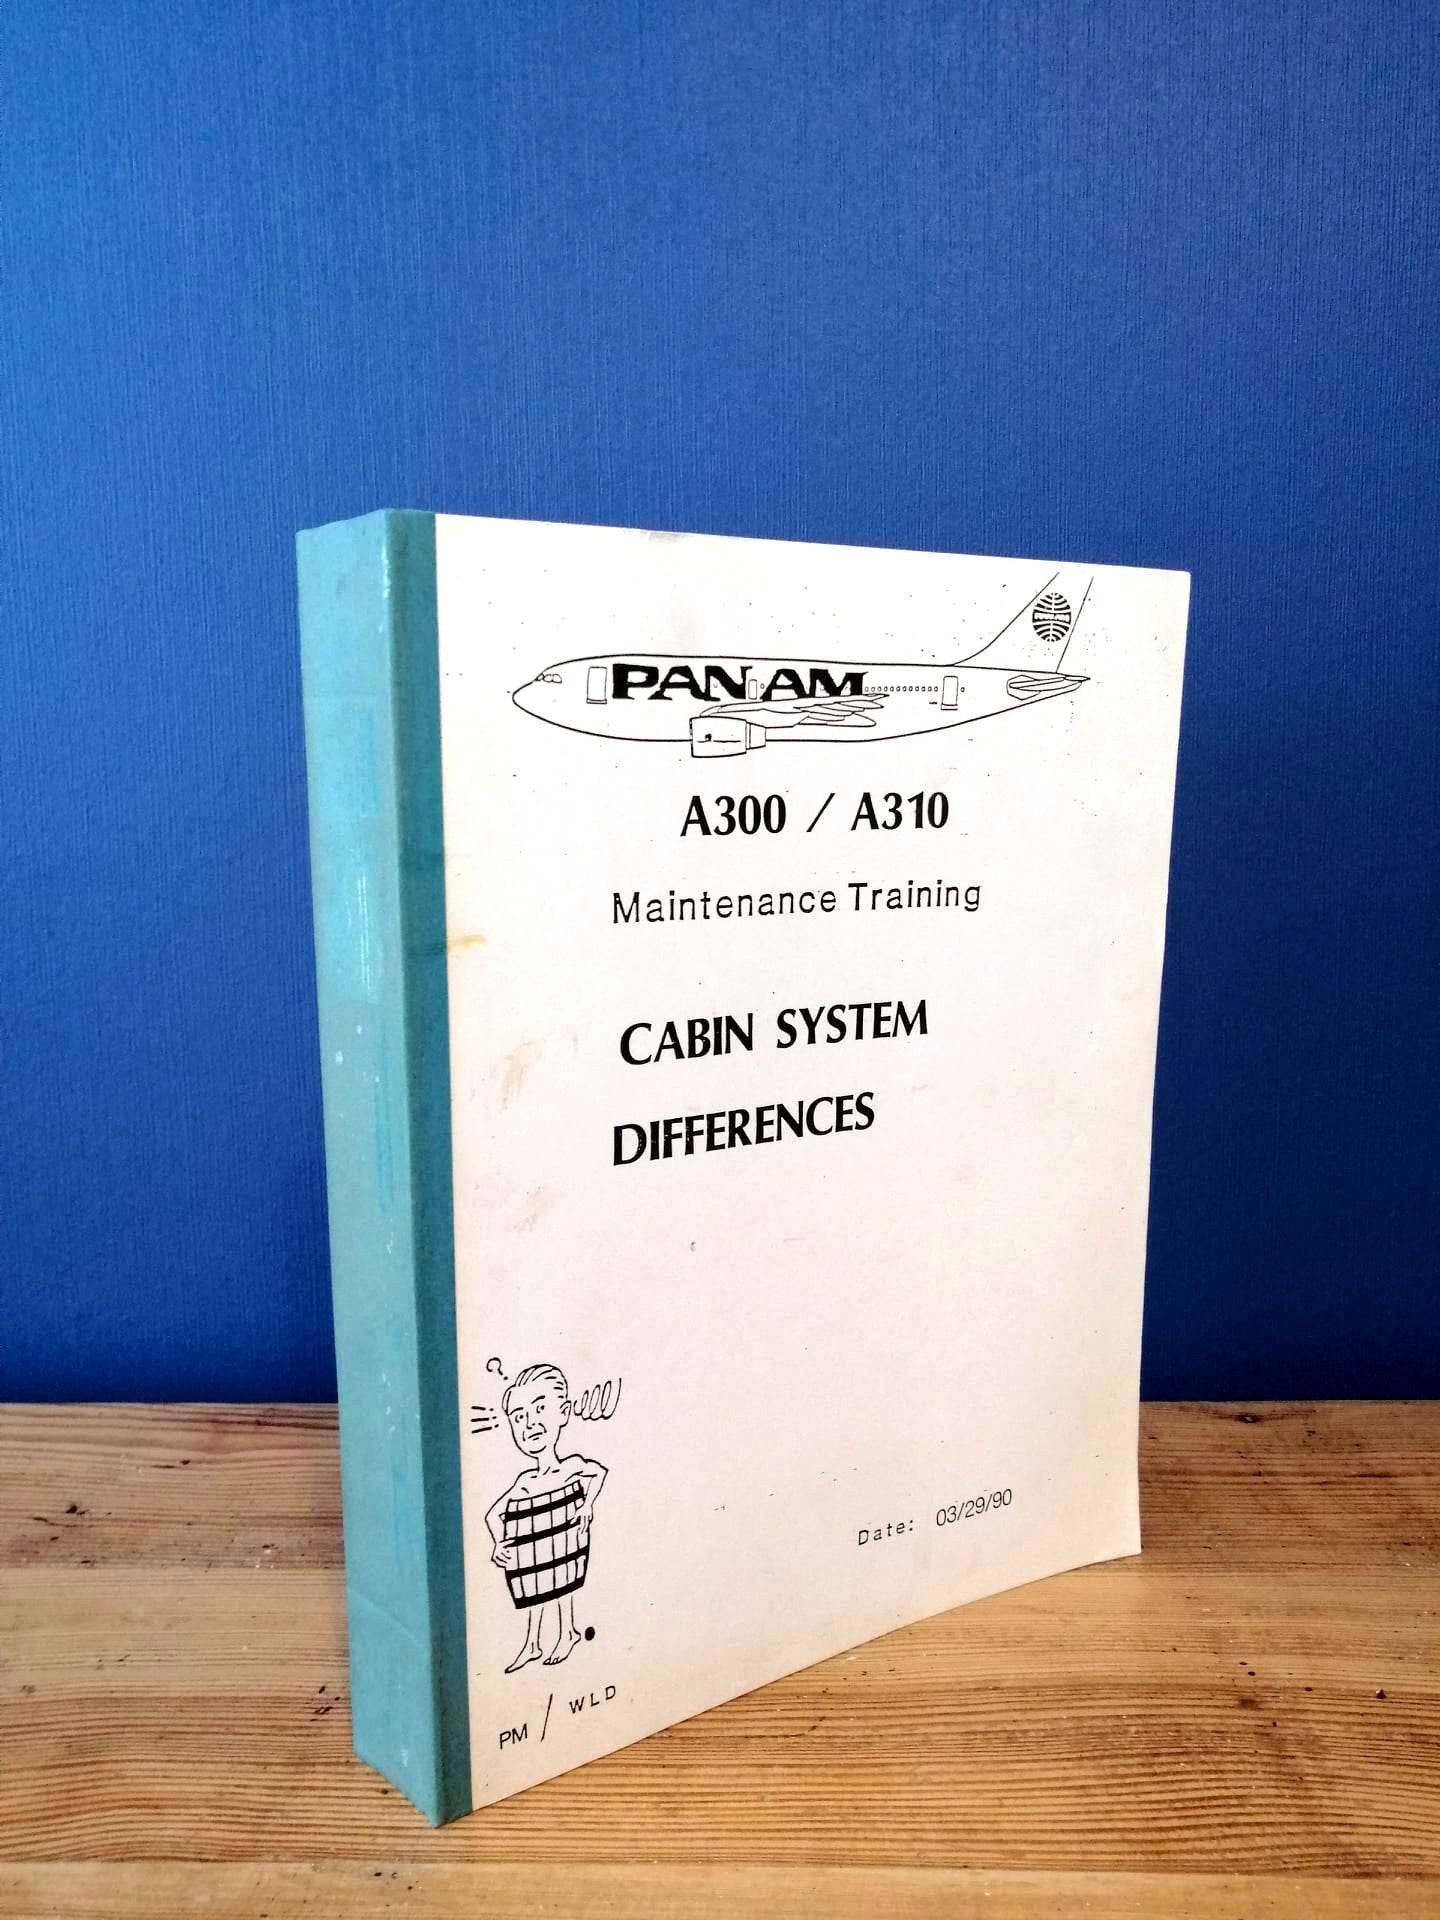 Original Pan Am A300 / A310 Maintenance Training Cabin System Differences, Unique Large Manual Book, 1990s, Aviation, Airlines